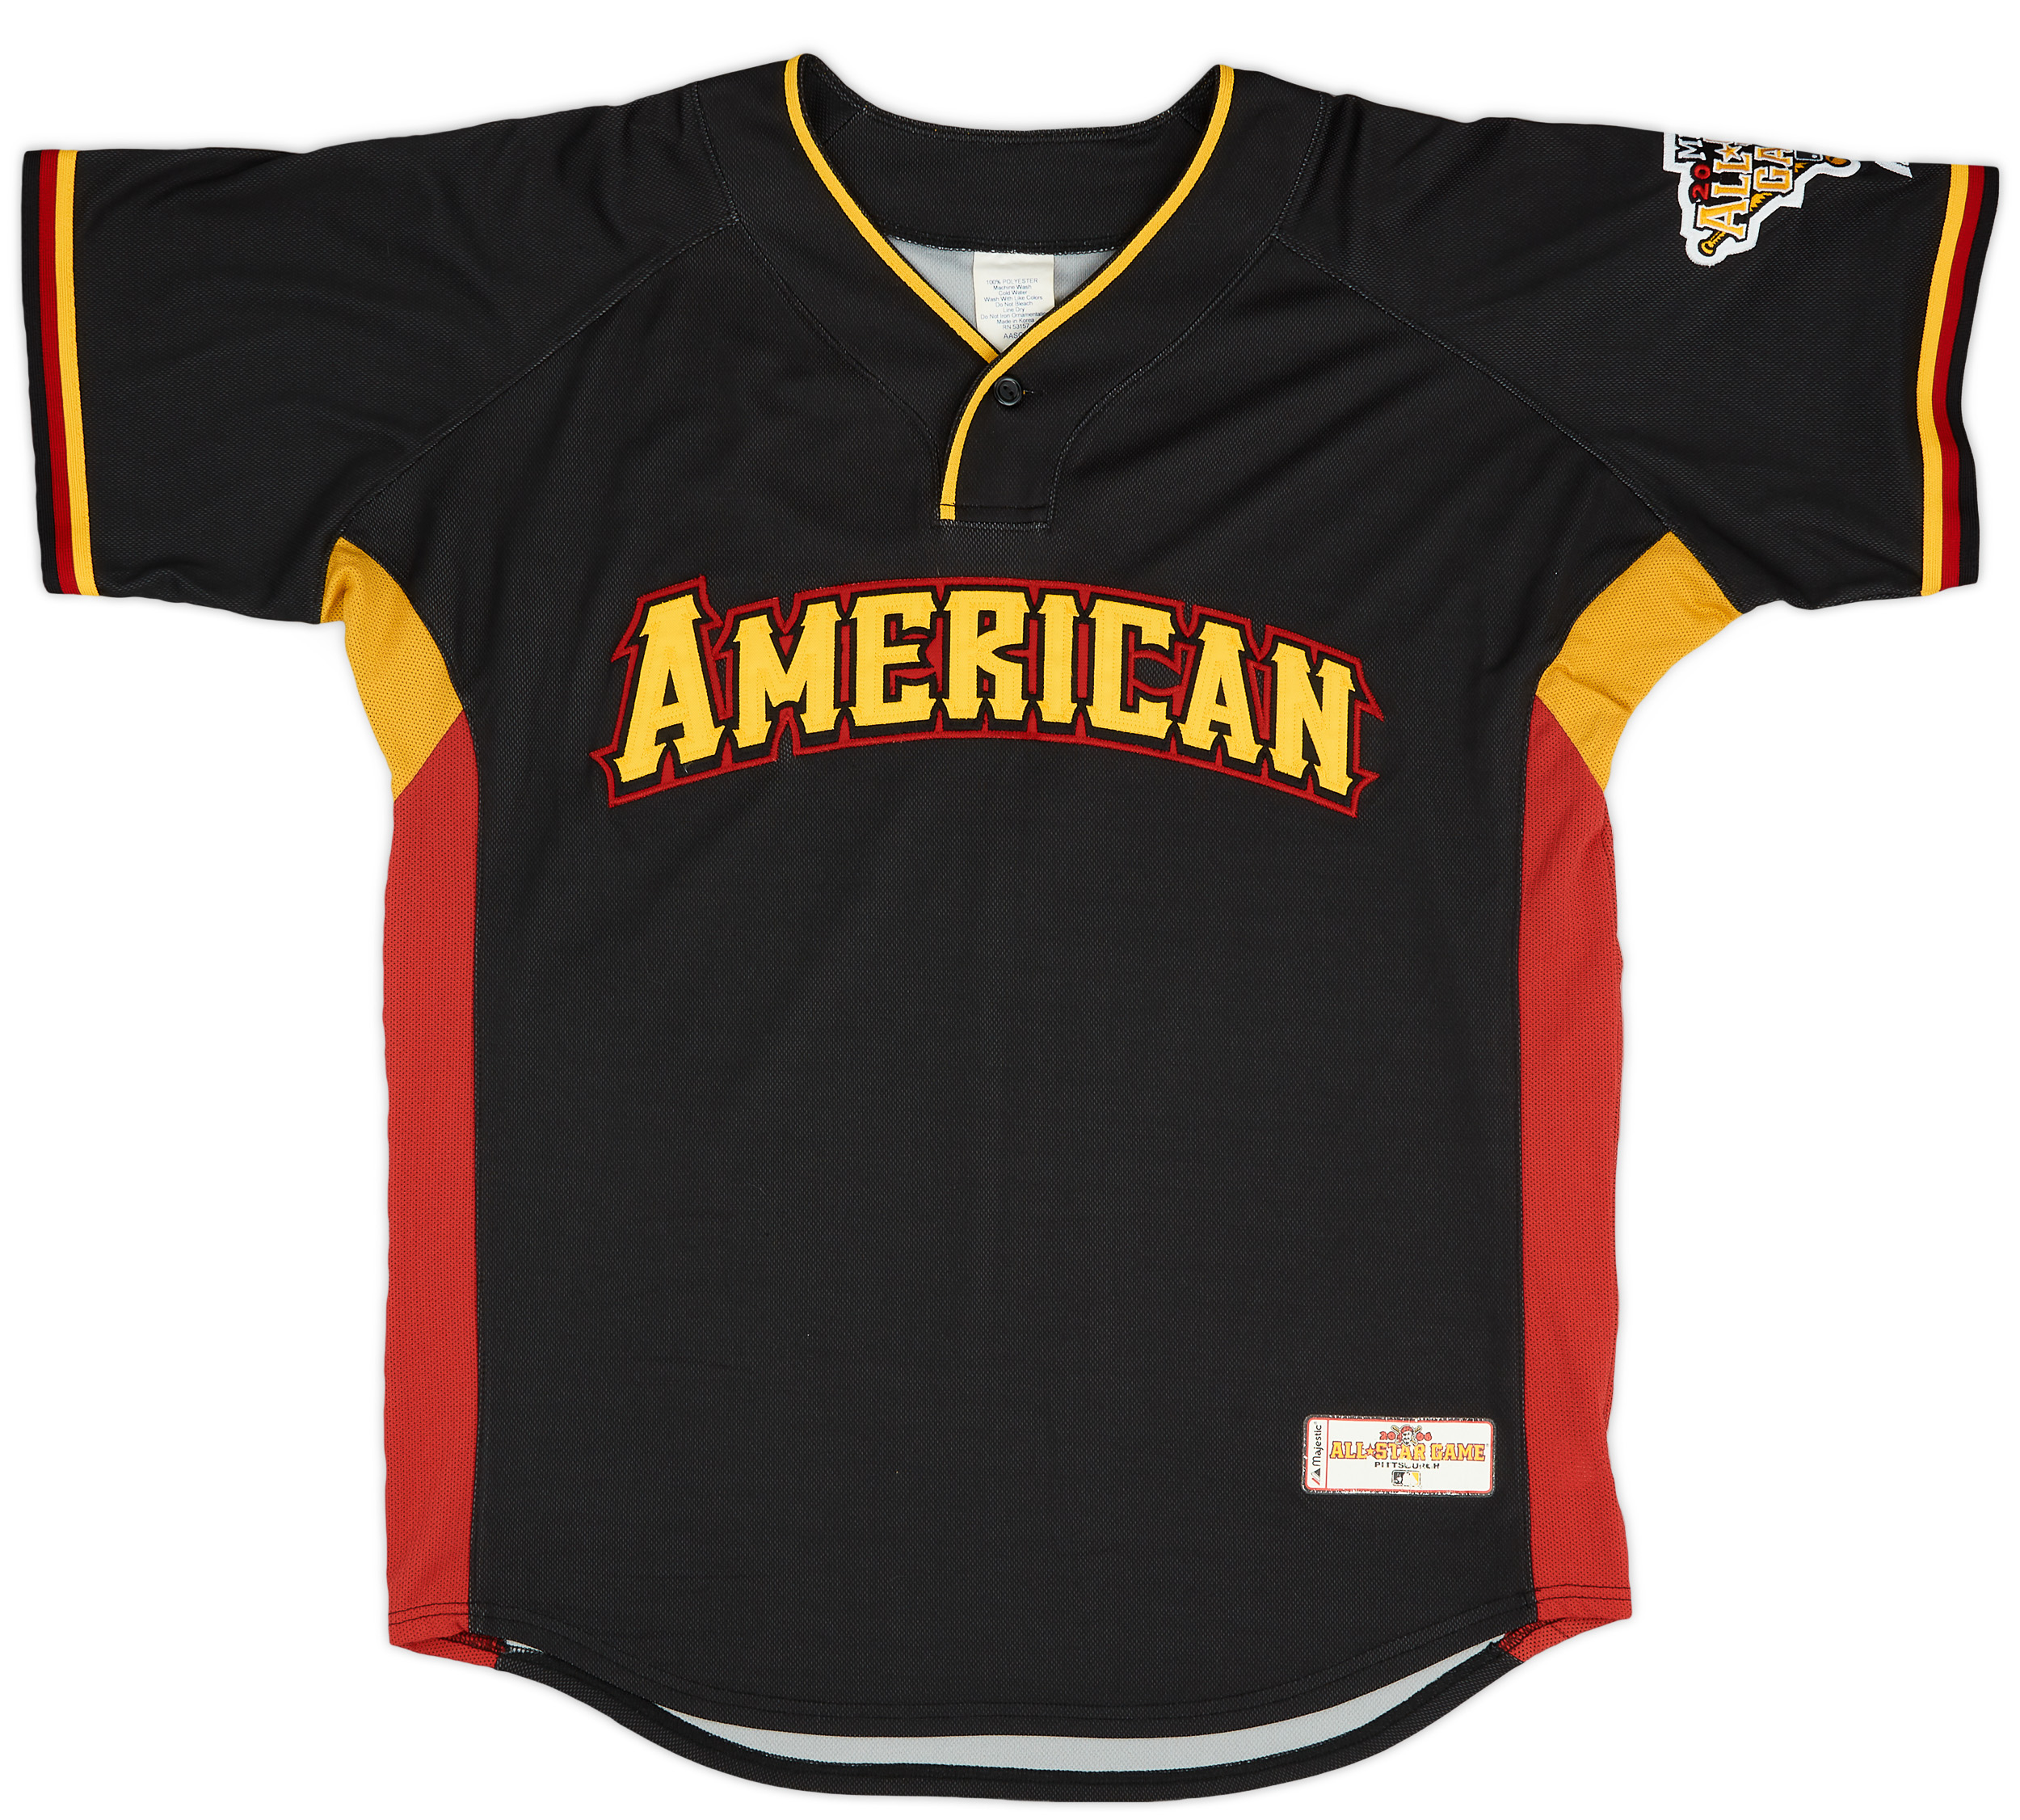 2006 American League MLB All-Star Authentic Majestic Jersey